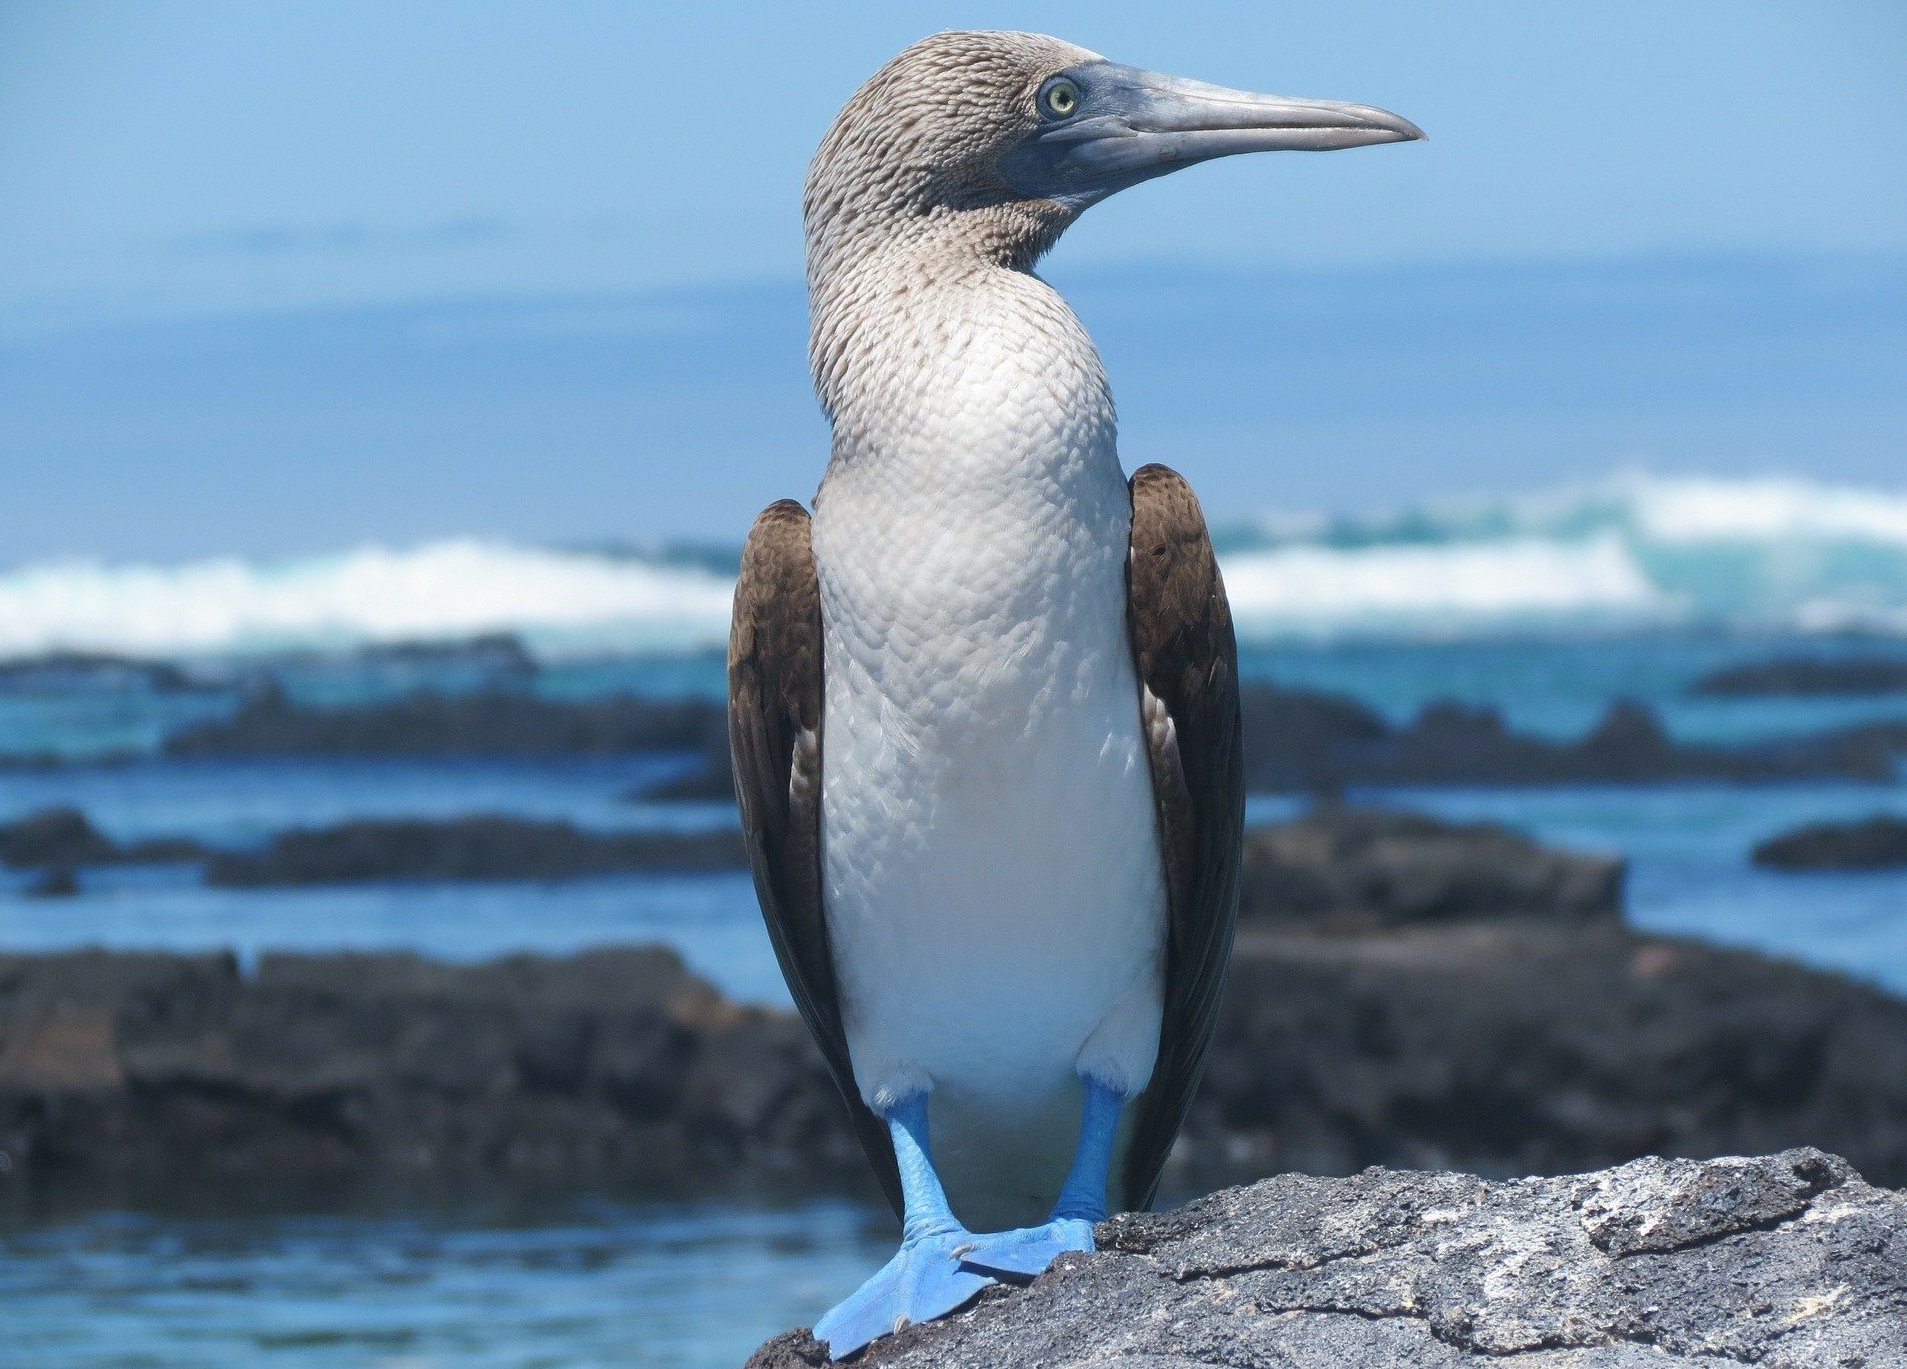 We are "wild" about the beautiful blue-footed booby!